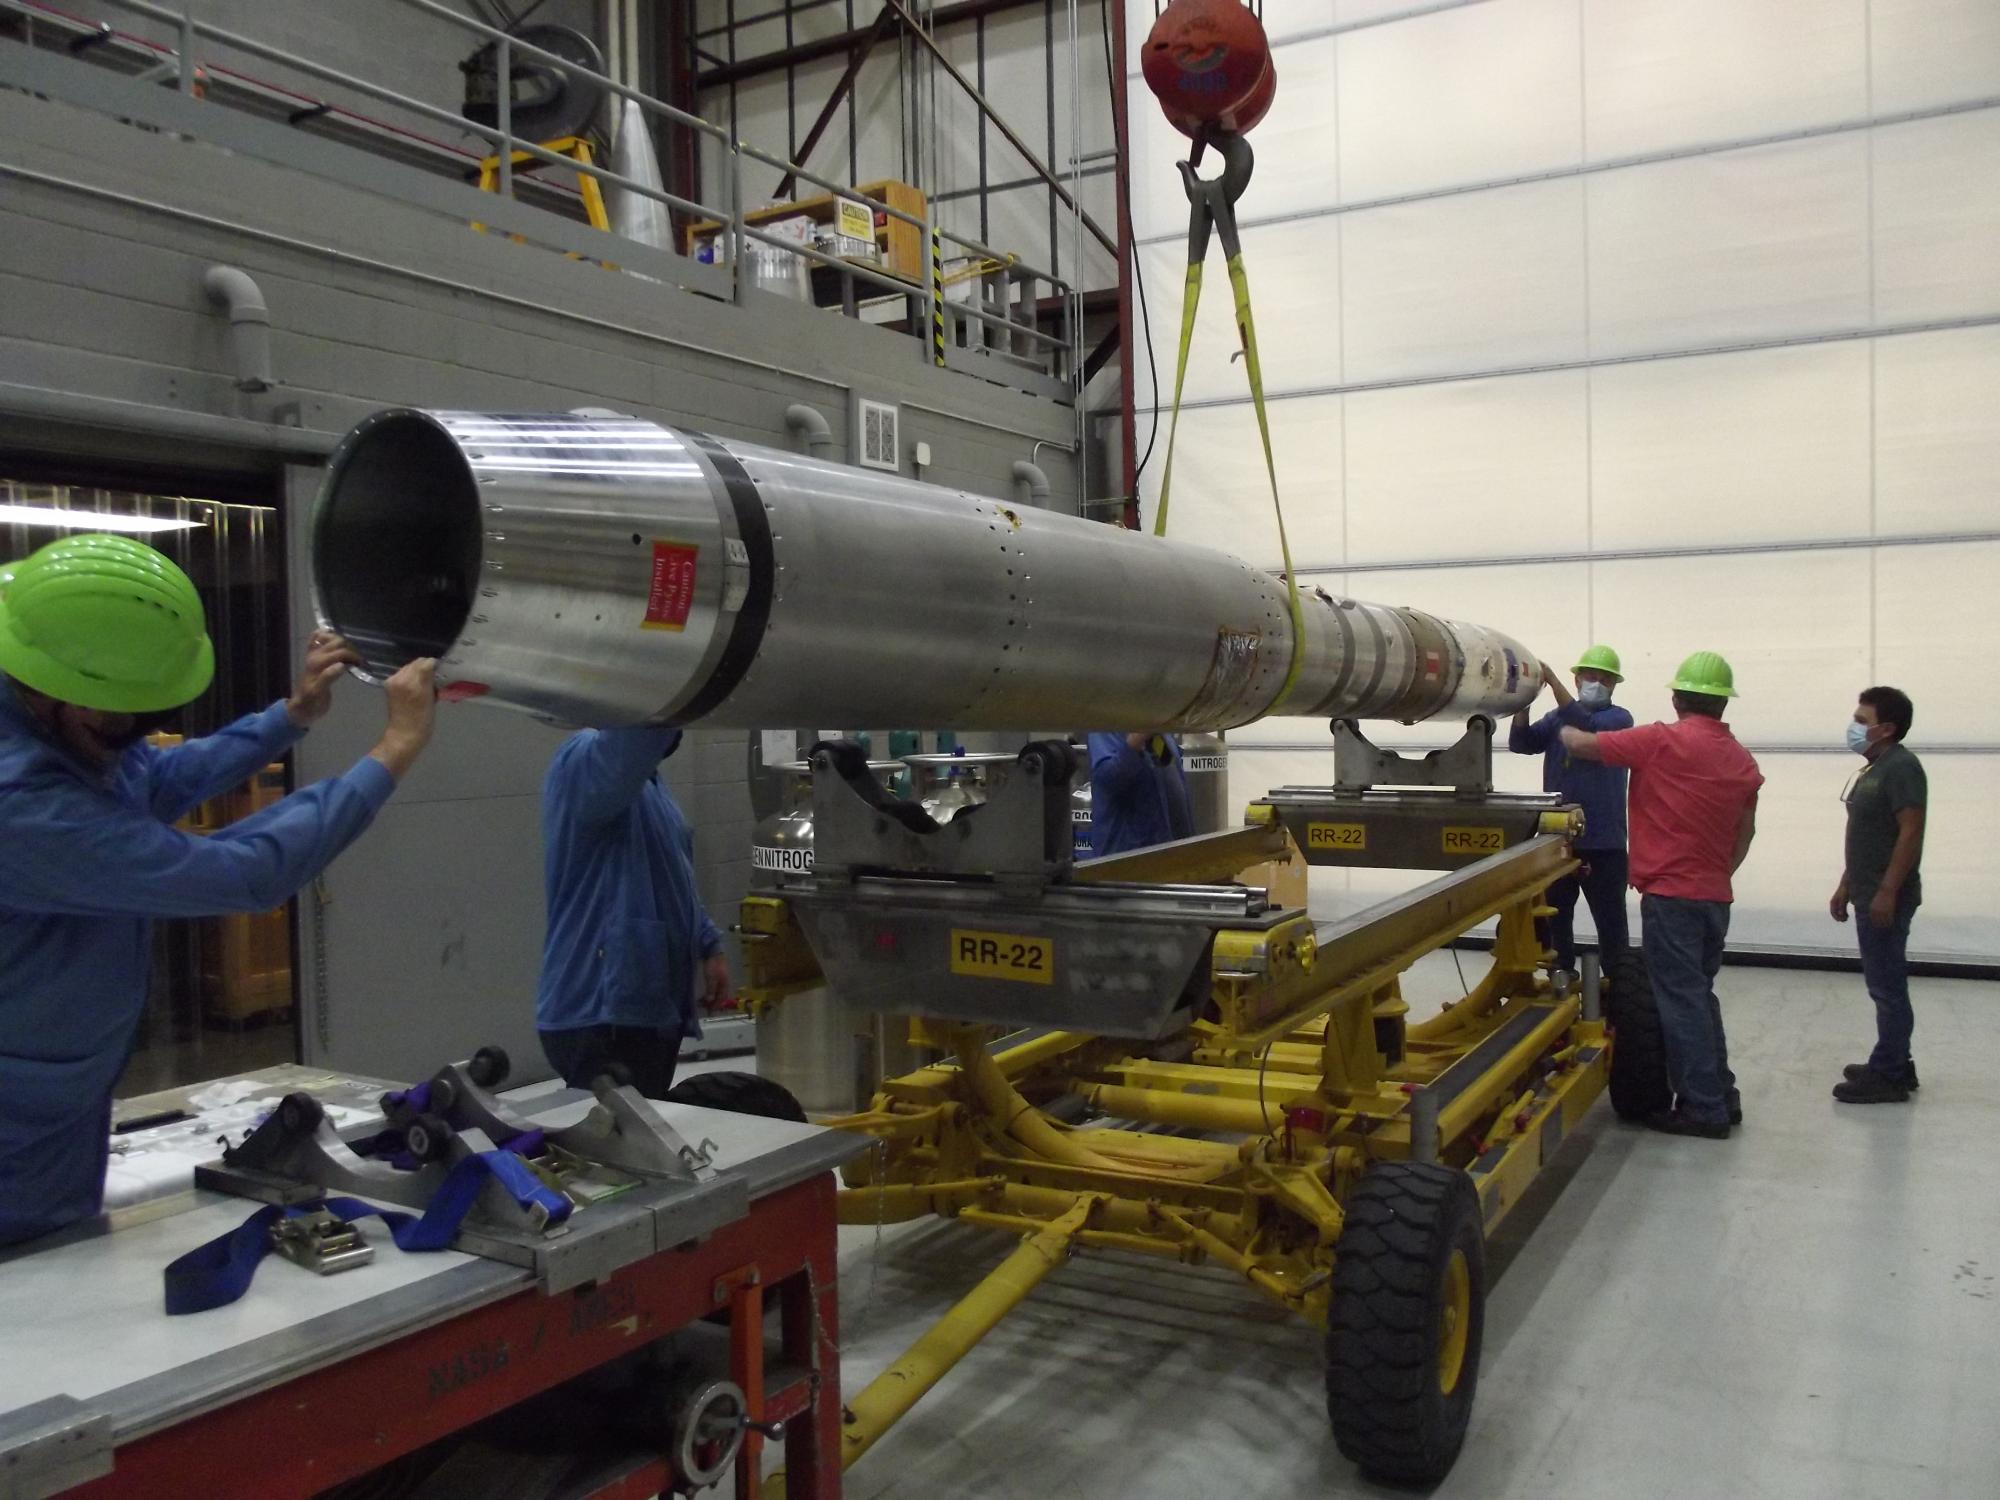 SDO/EVE calibration rocket assembly in White Sands, New Mexico. (Credit: LASP)